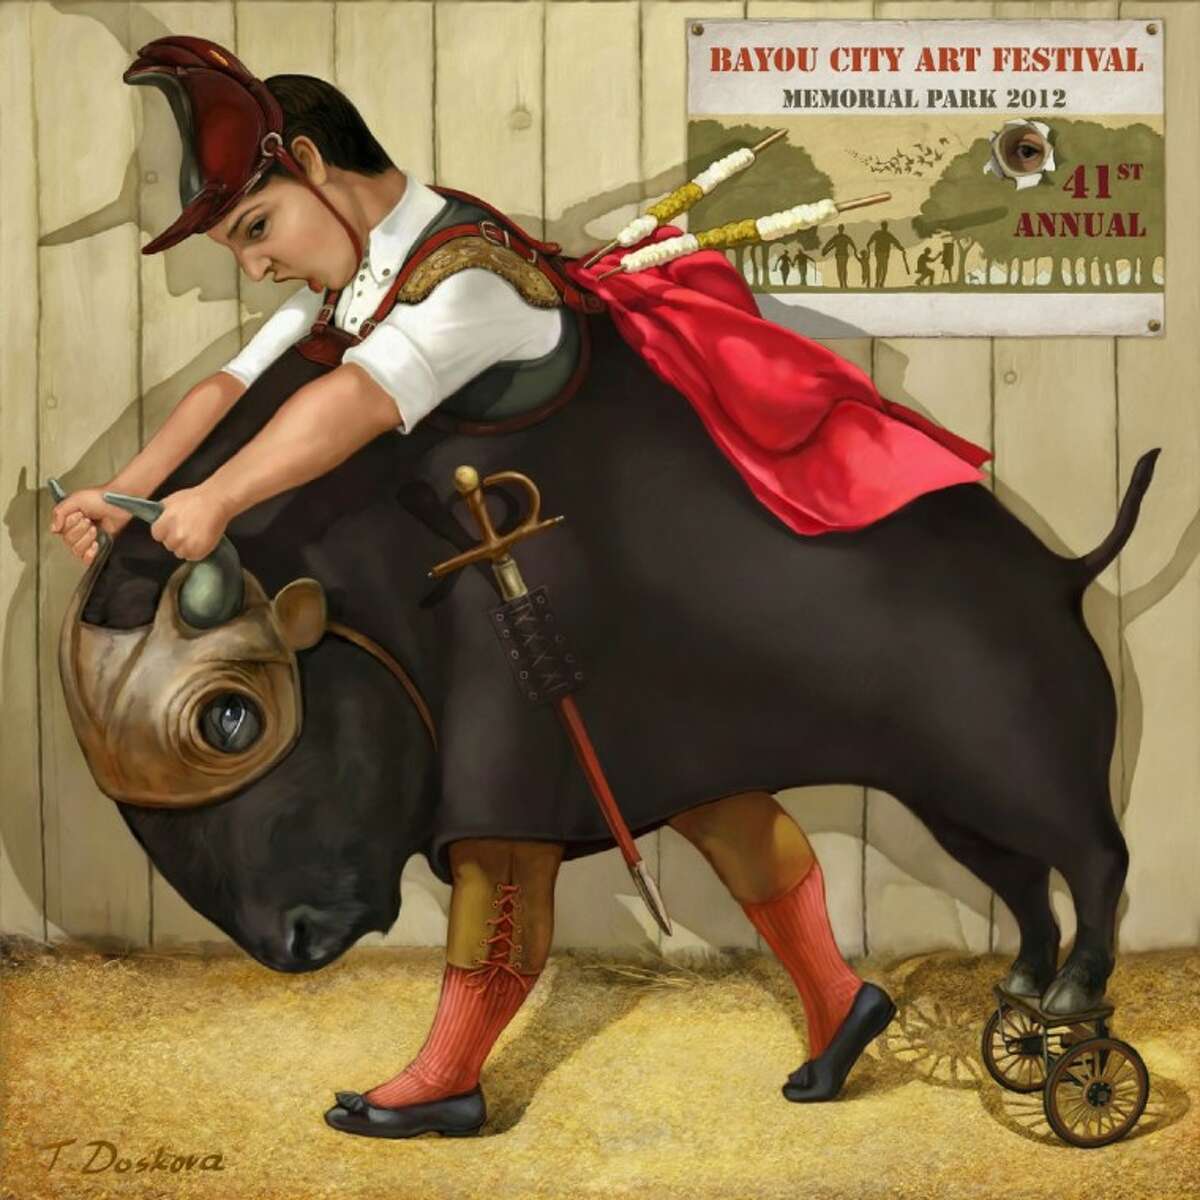 Artwork titled “La Corrida” by Tanya Doskova, the 41st Annual Capital One Bank Bayou City Art Festival Memorial Park’s featured artist. (Submitted by the Bayou City Art Festival)